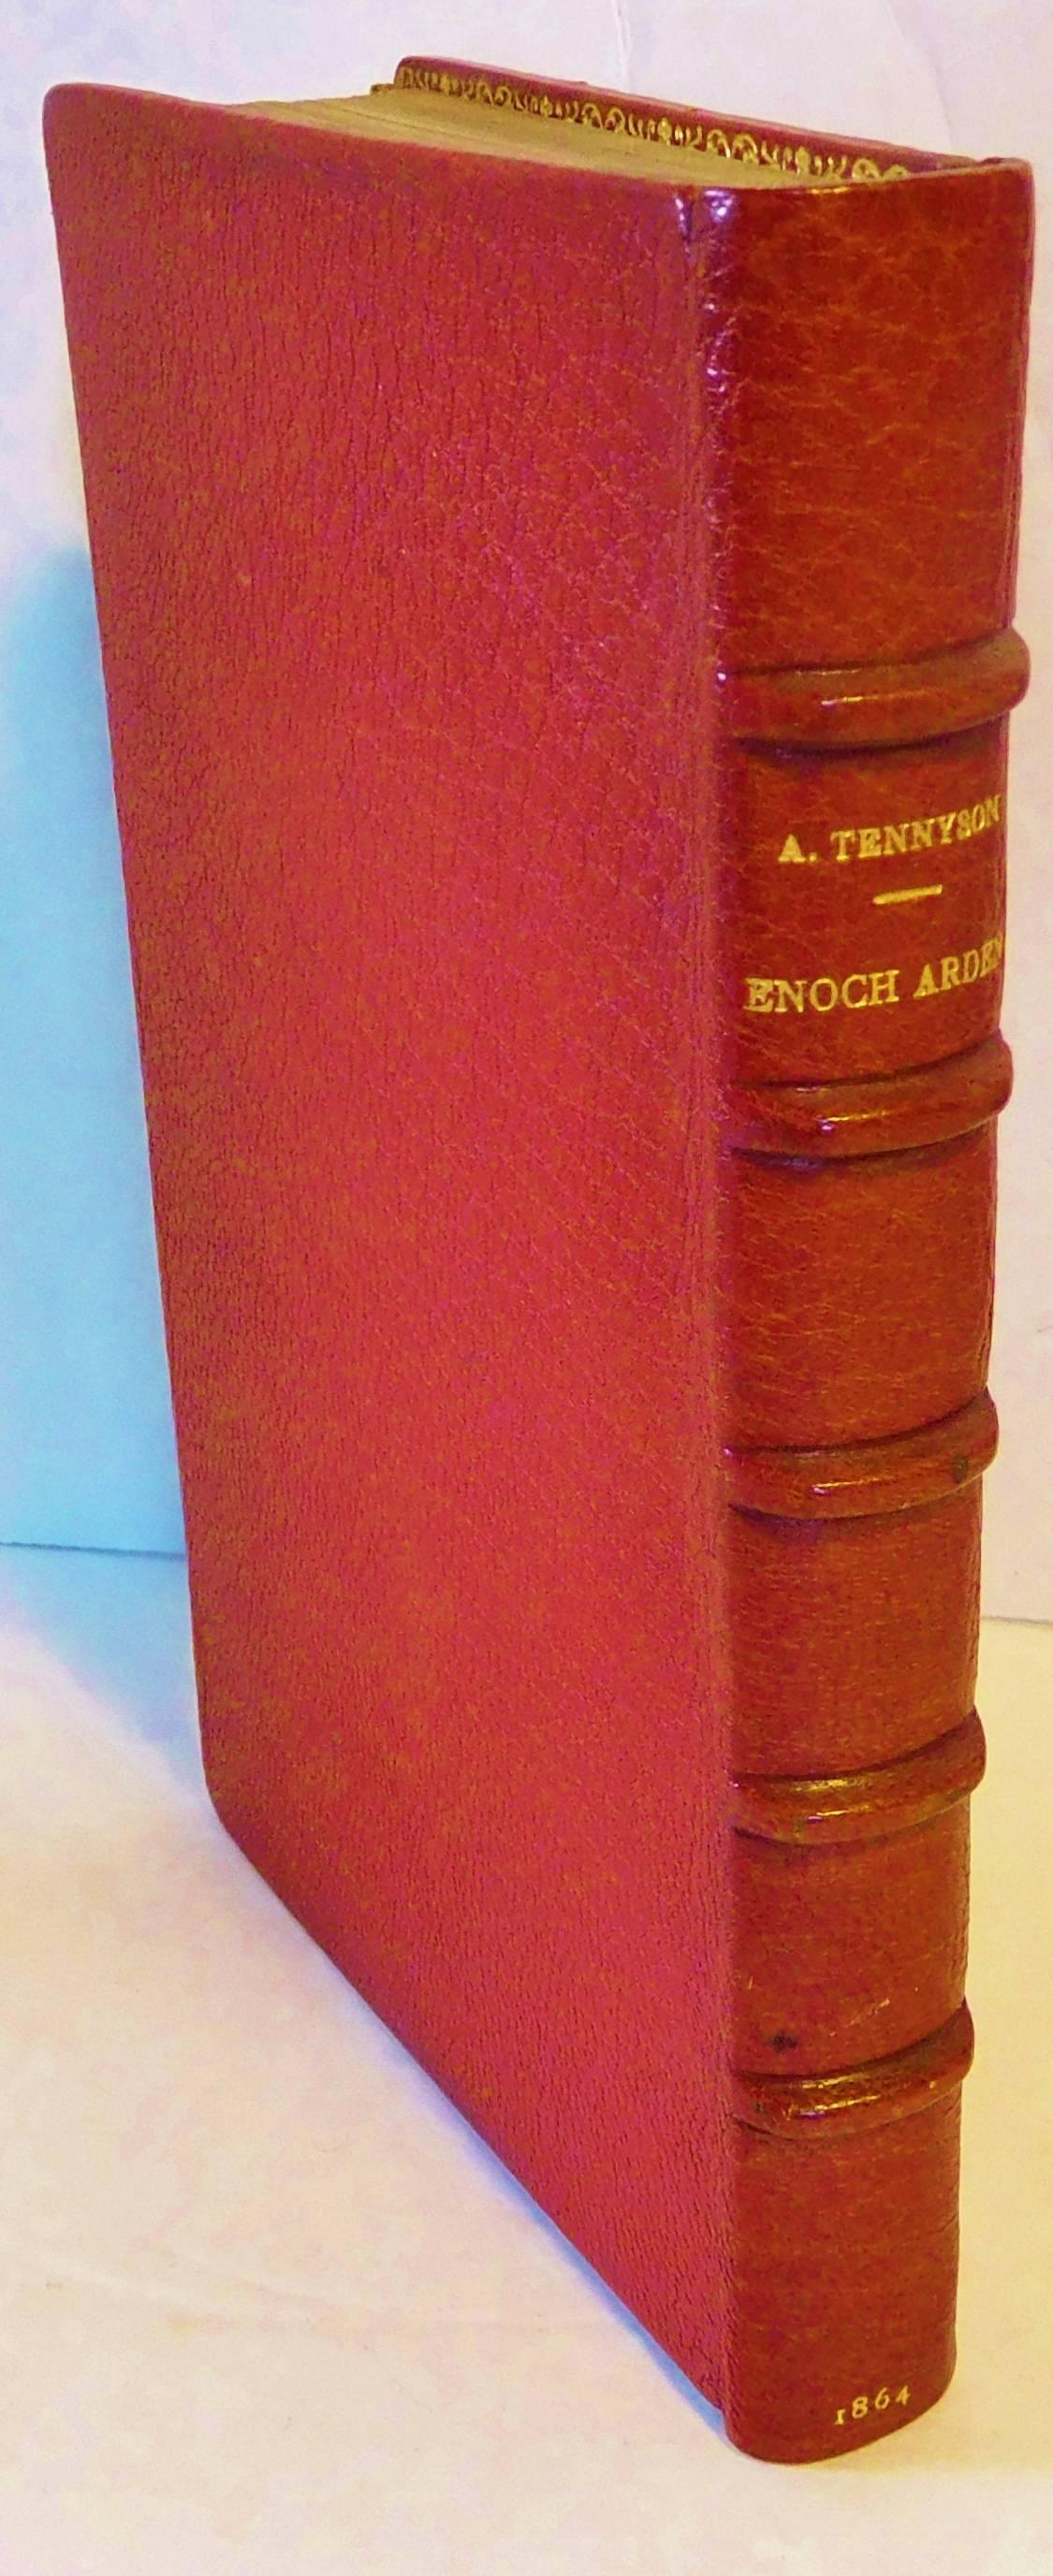 This first edition of Alfred Tennyson's (1809-1892) famous narrative poem was published in London by Edward Moxon and Co, of Dover Street. in 1864. It was printed by Bradley and Evans, Whitefriars, London. And it was bound in crimson Moroccan